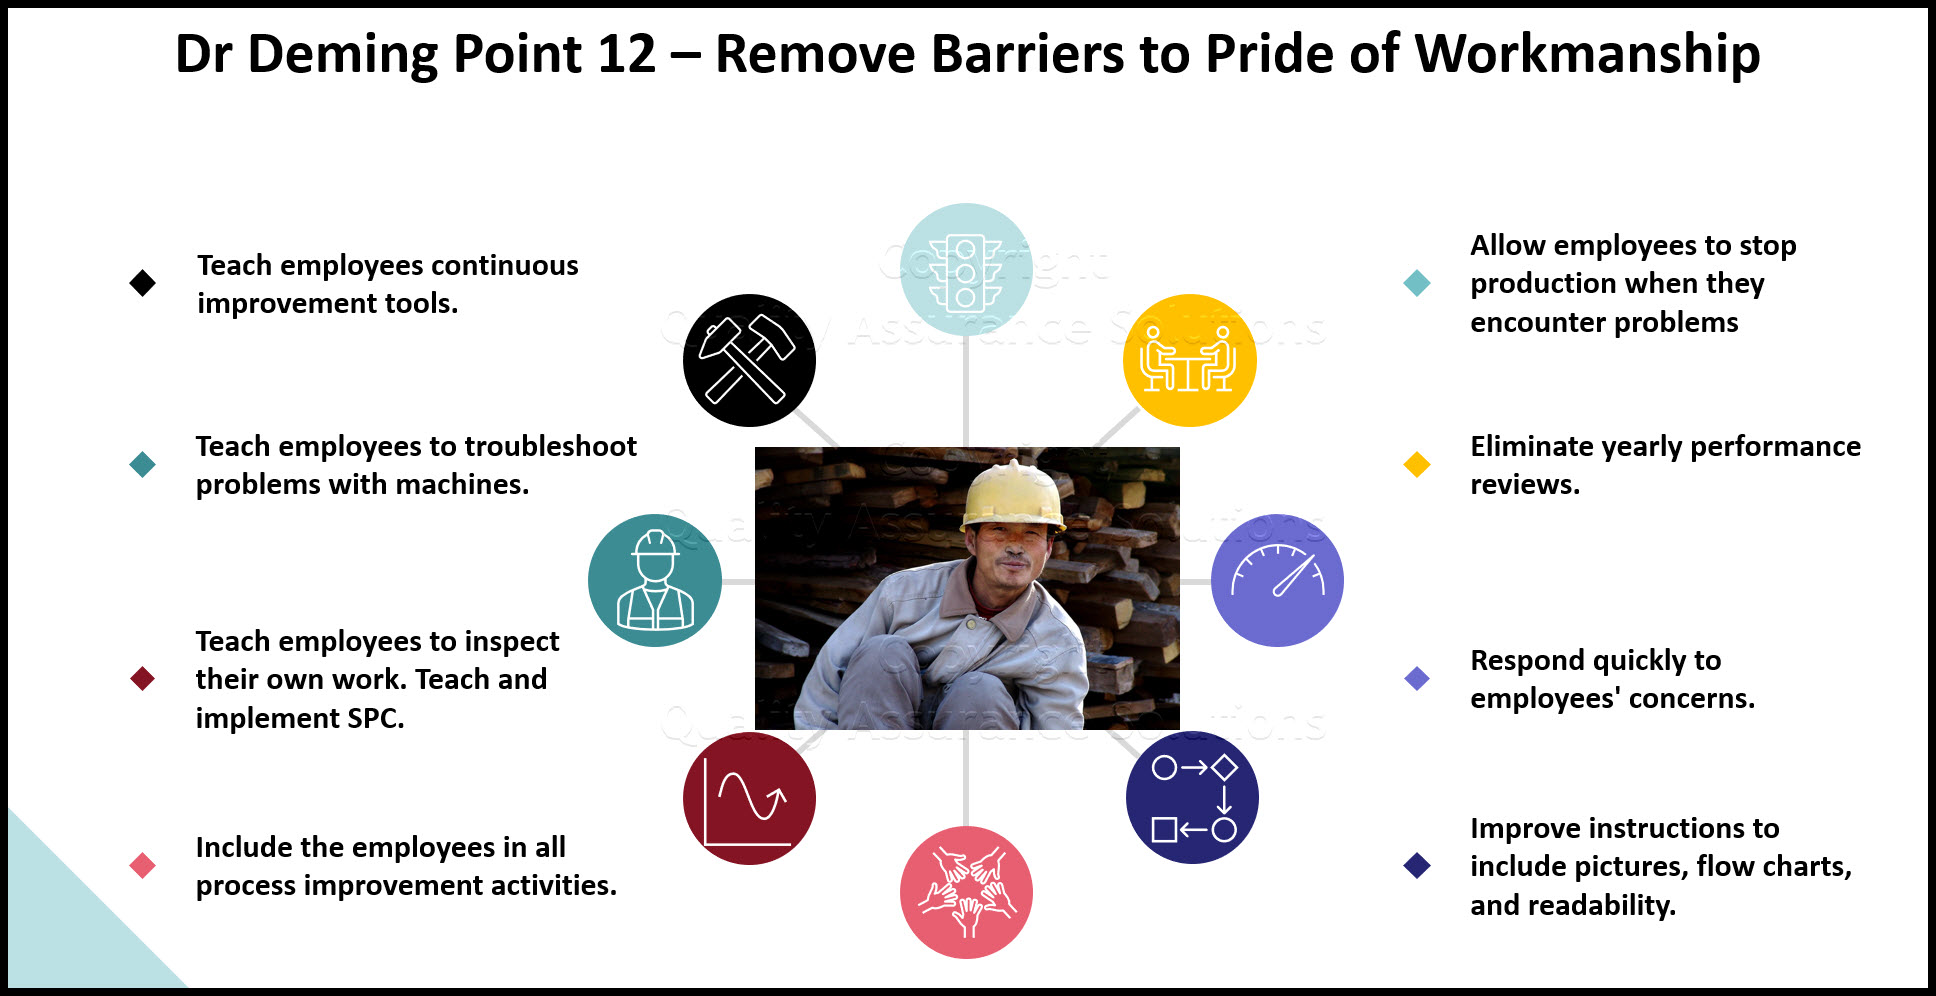 Page discusses Dr. Deming point 12 of his 14 points in detail. Provides insite on actions a company can take to remove barriers to pride of workmanship. 